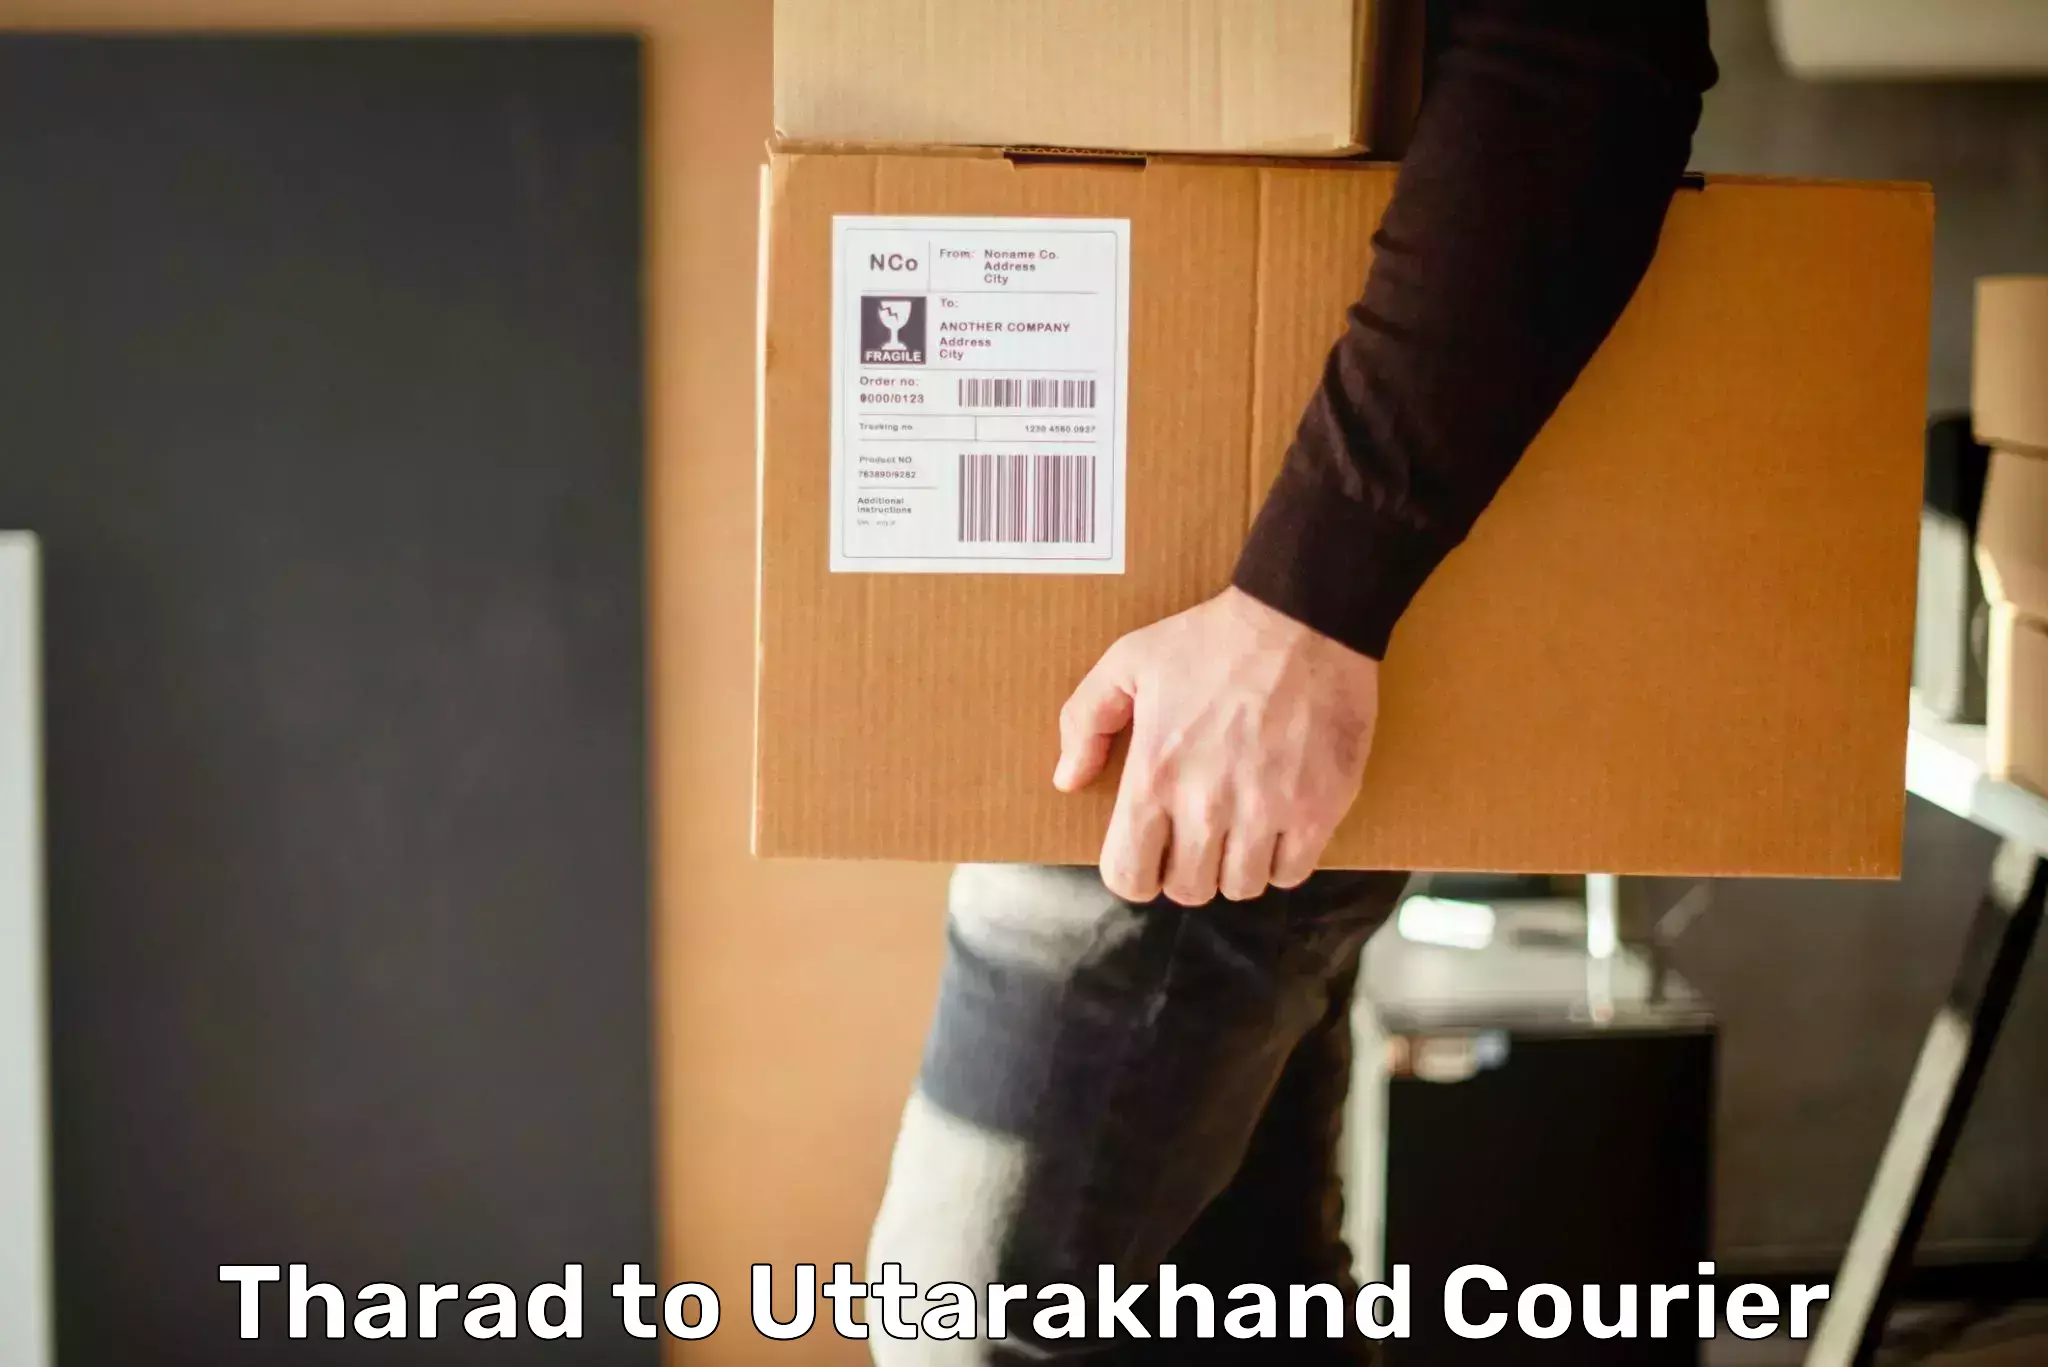 Courier app Tharad to Rishikesh